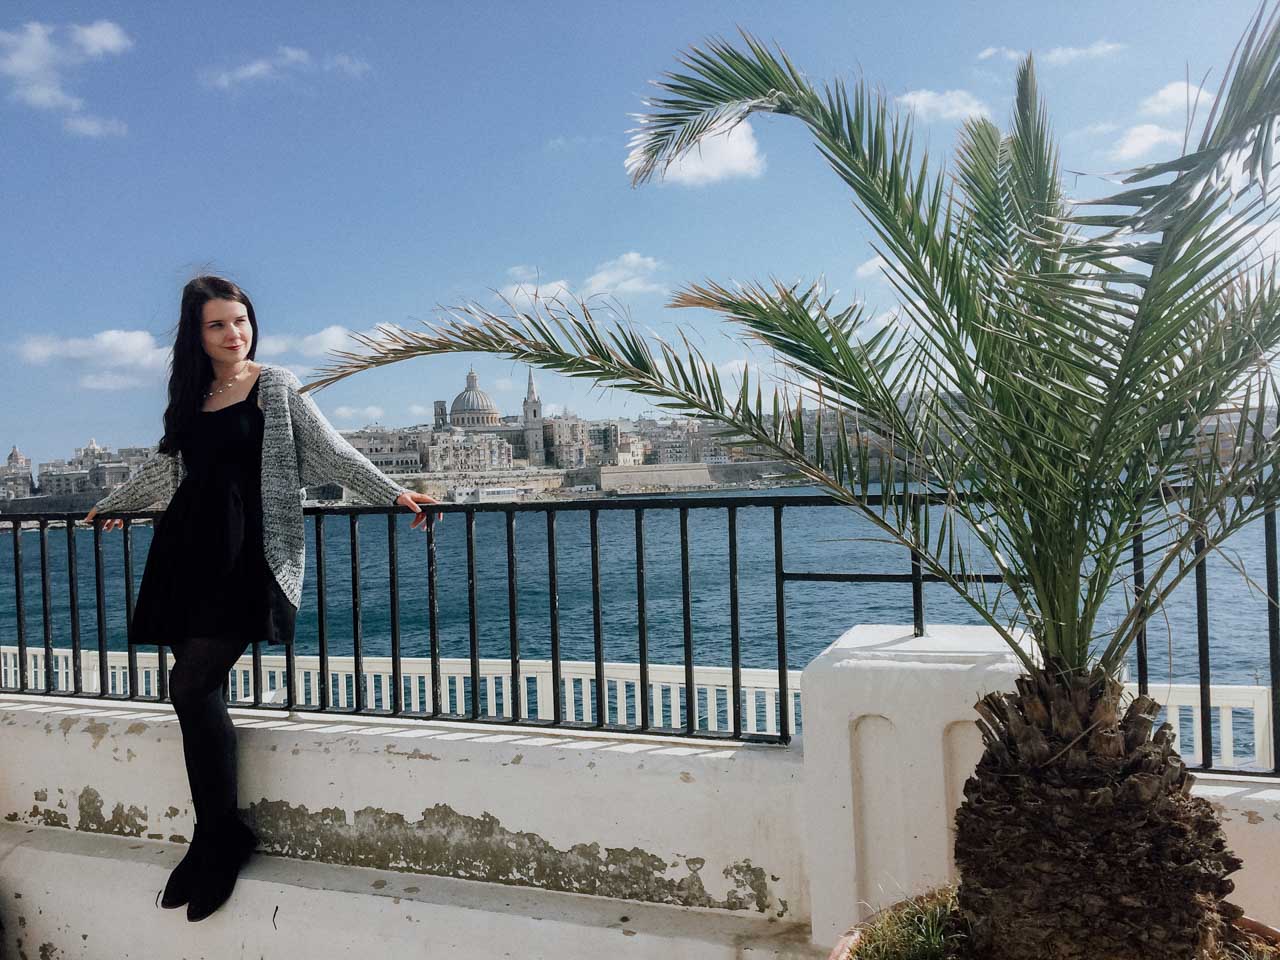 A girl standing on the promenade in Sliema, Malta with the Valletta skyline in the background